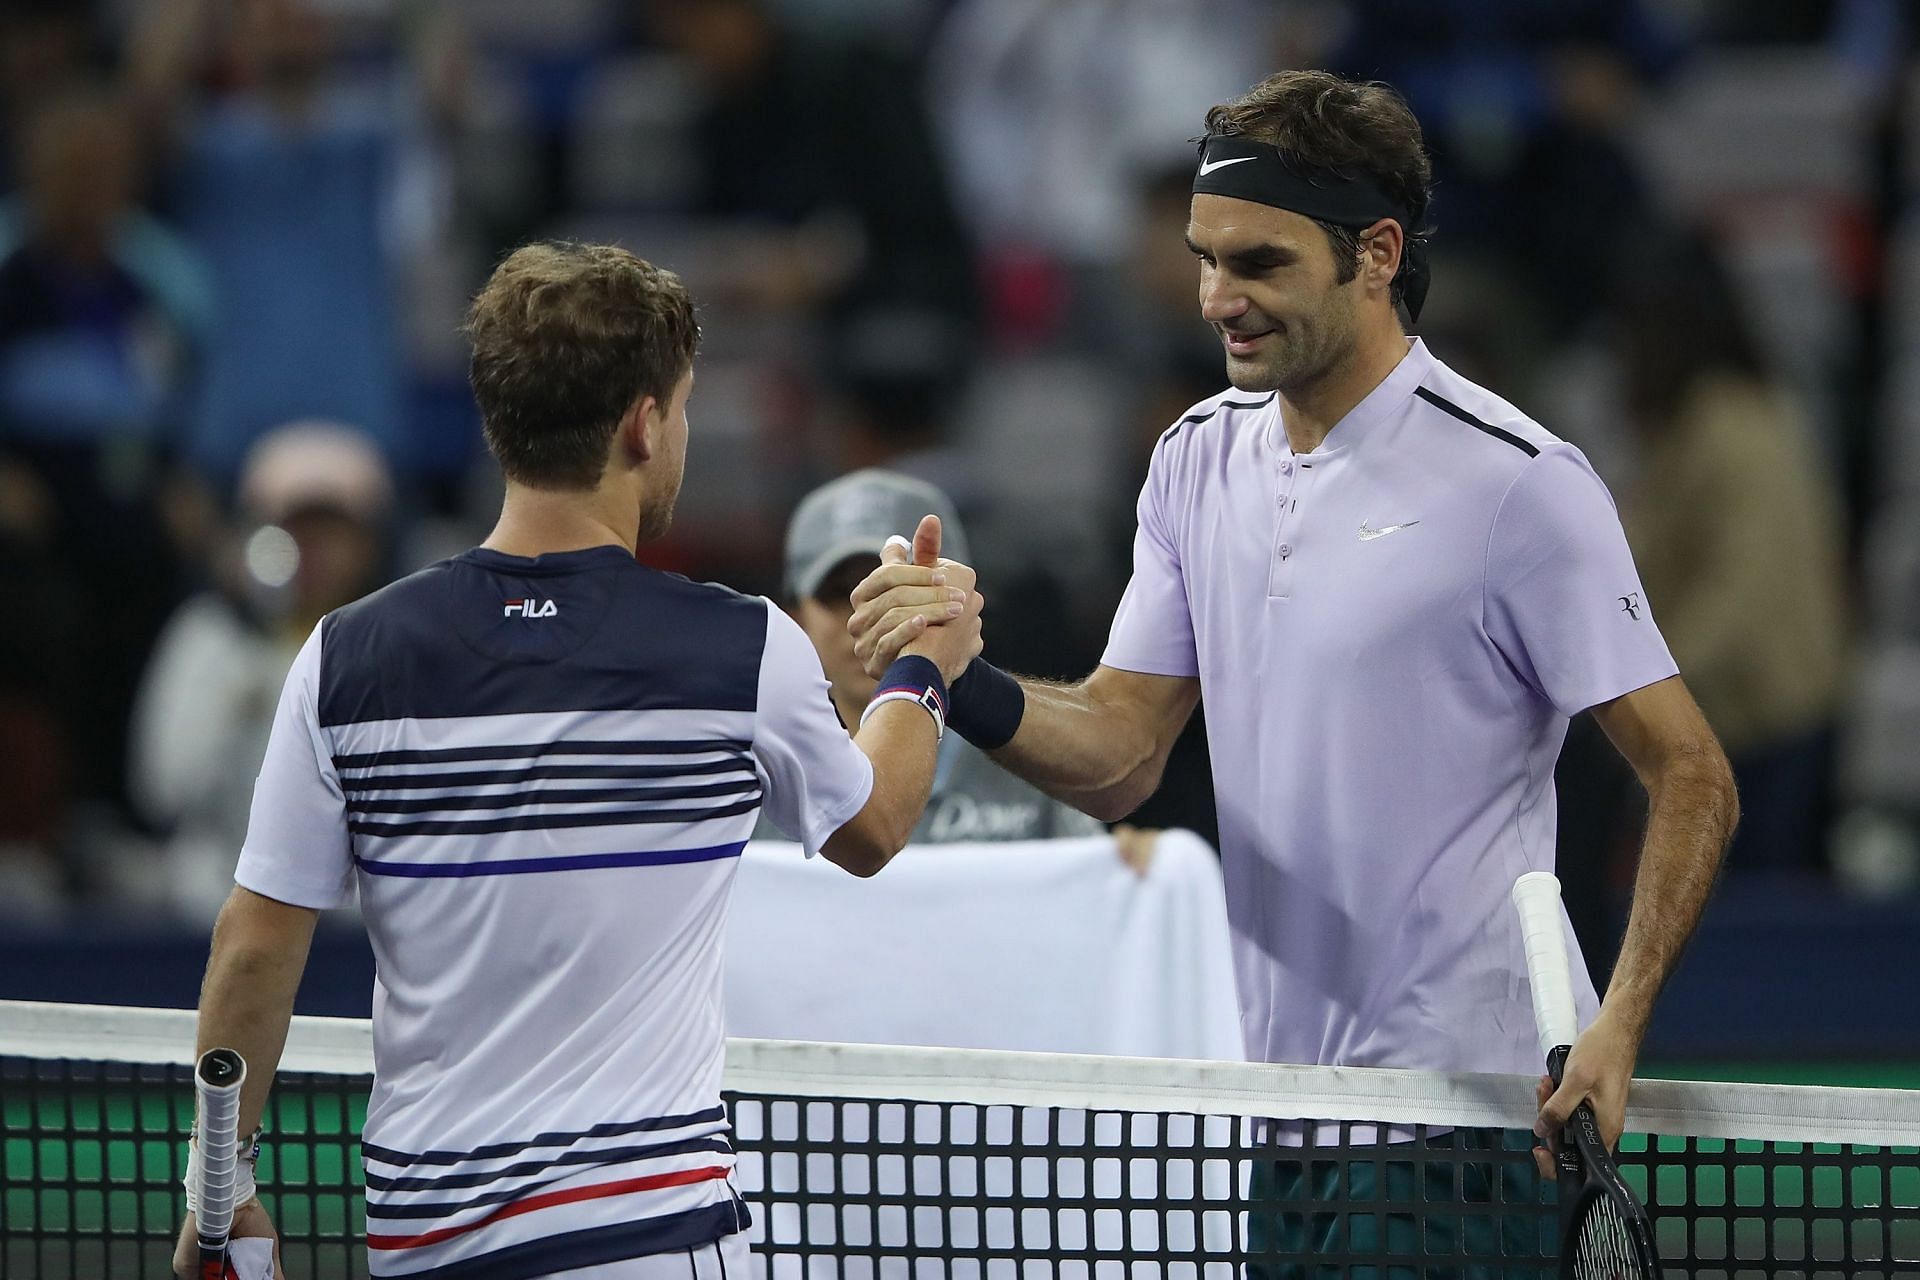 Roger Federer has a perfect 4-0 record against Diego Schwartzman